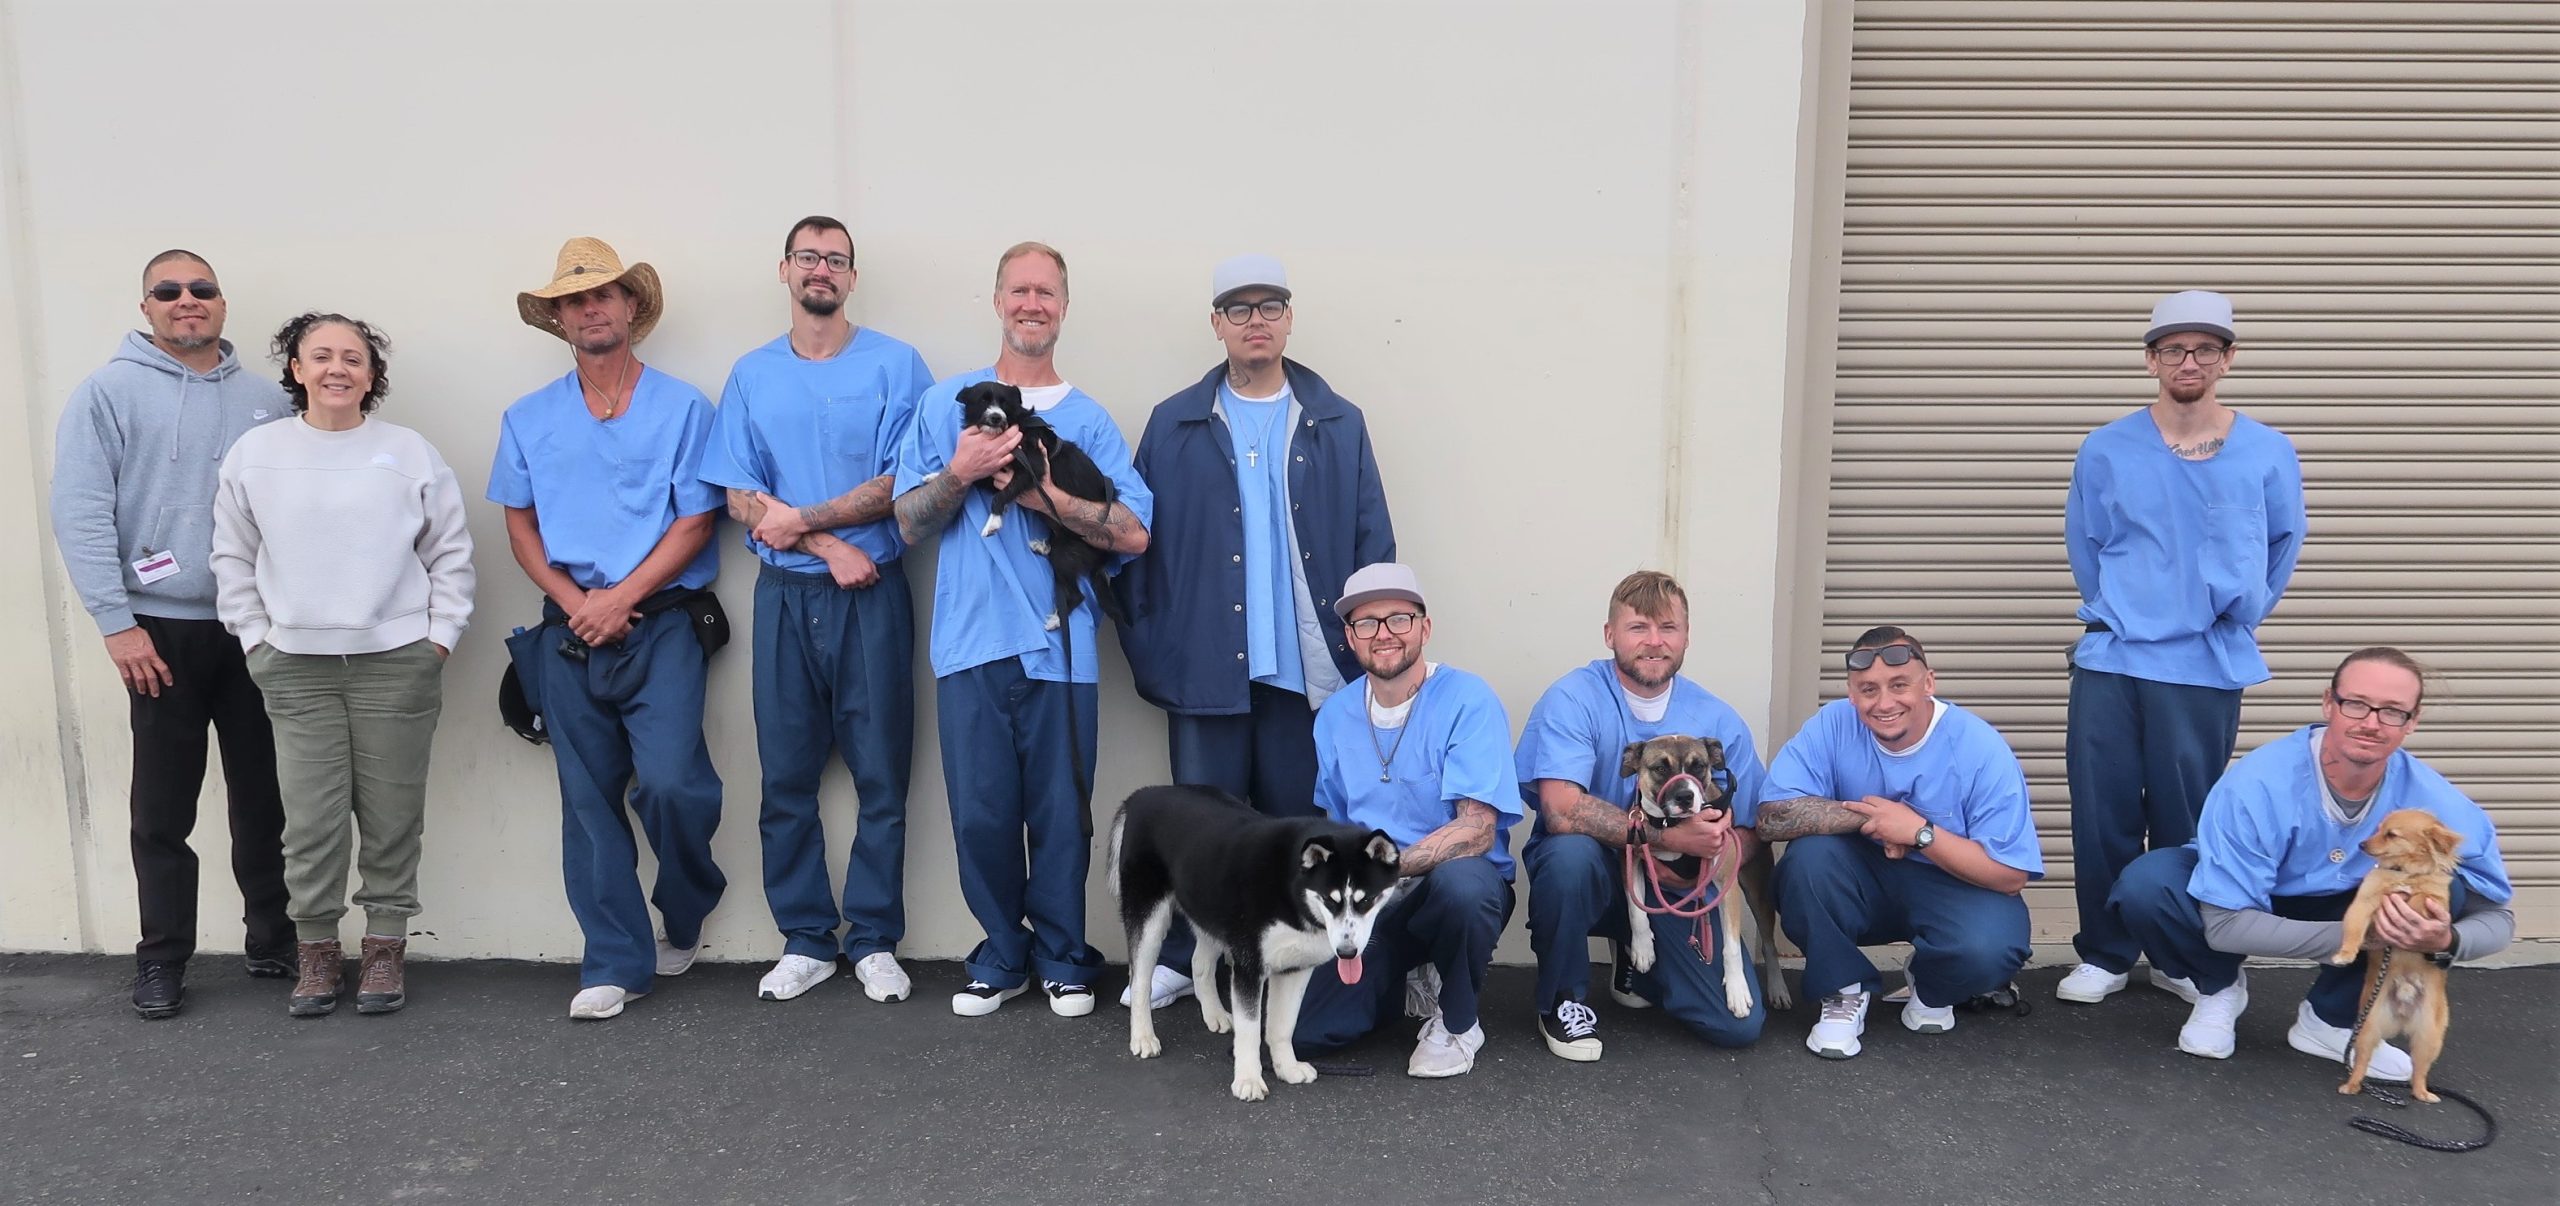 Dogs at Avenal State Prison (ASP) with their incarcerated trainers and two people from a nonprofit organization.